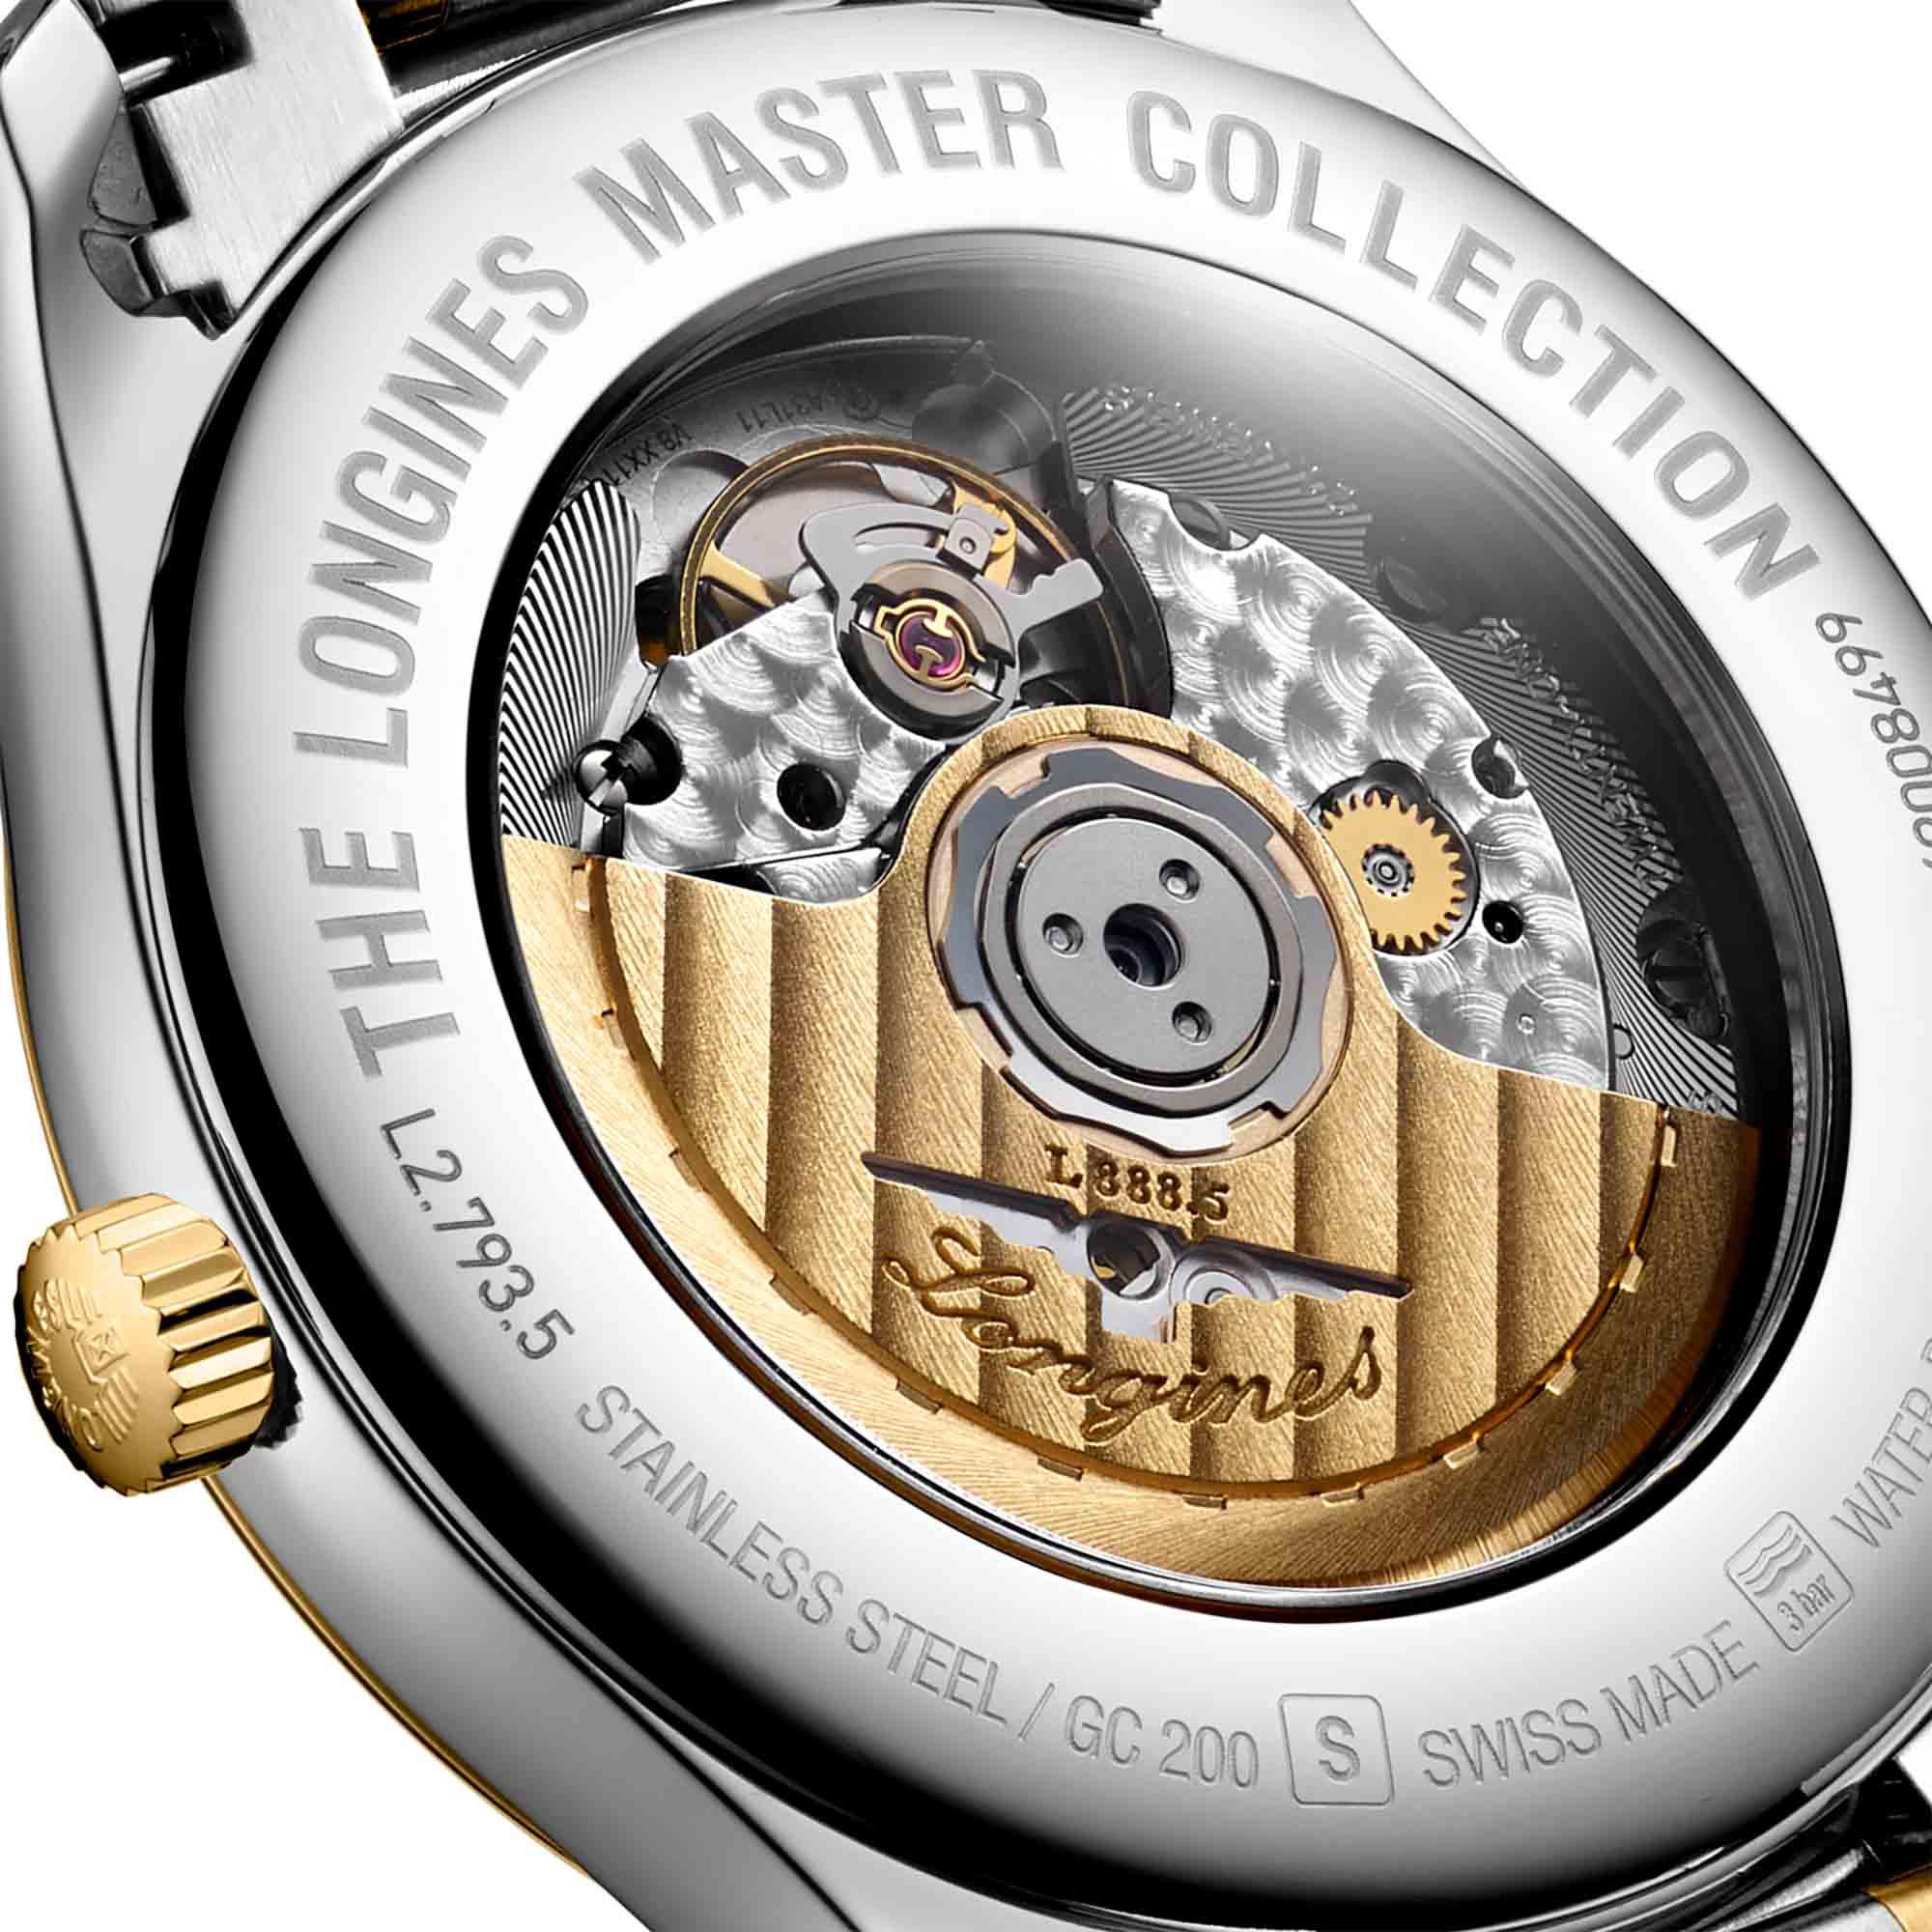 Longines The Longines Master Collection (Ref: L2.793.5.37.7)